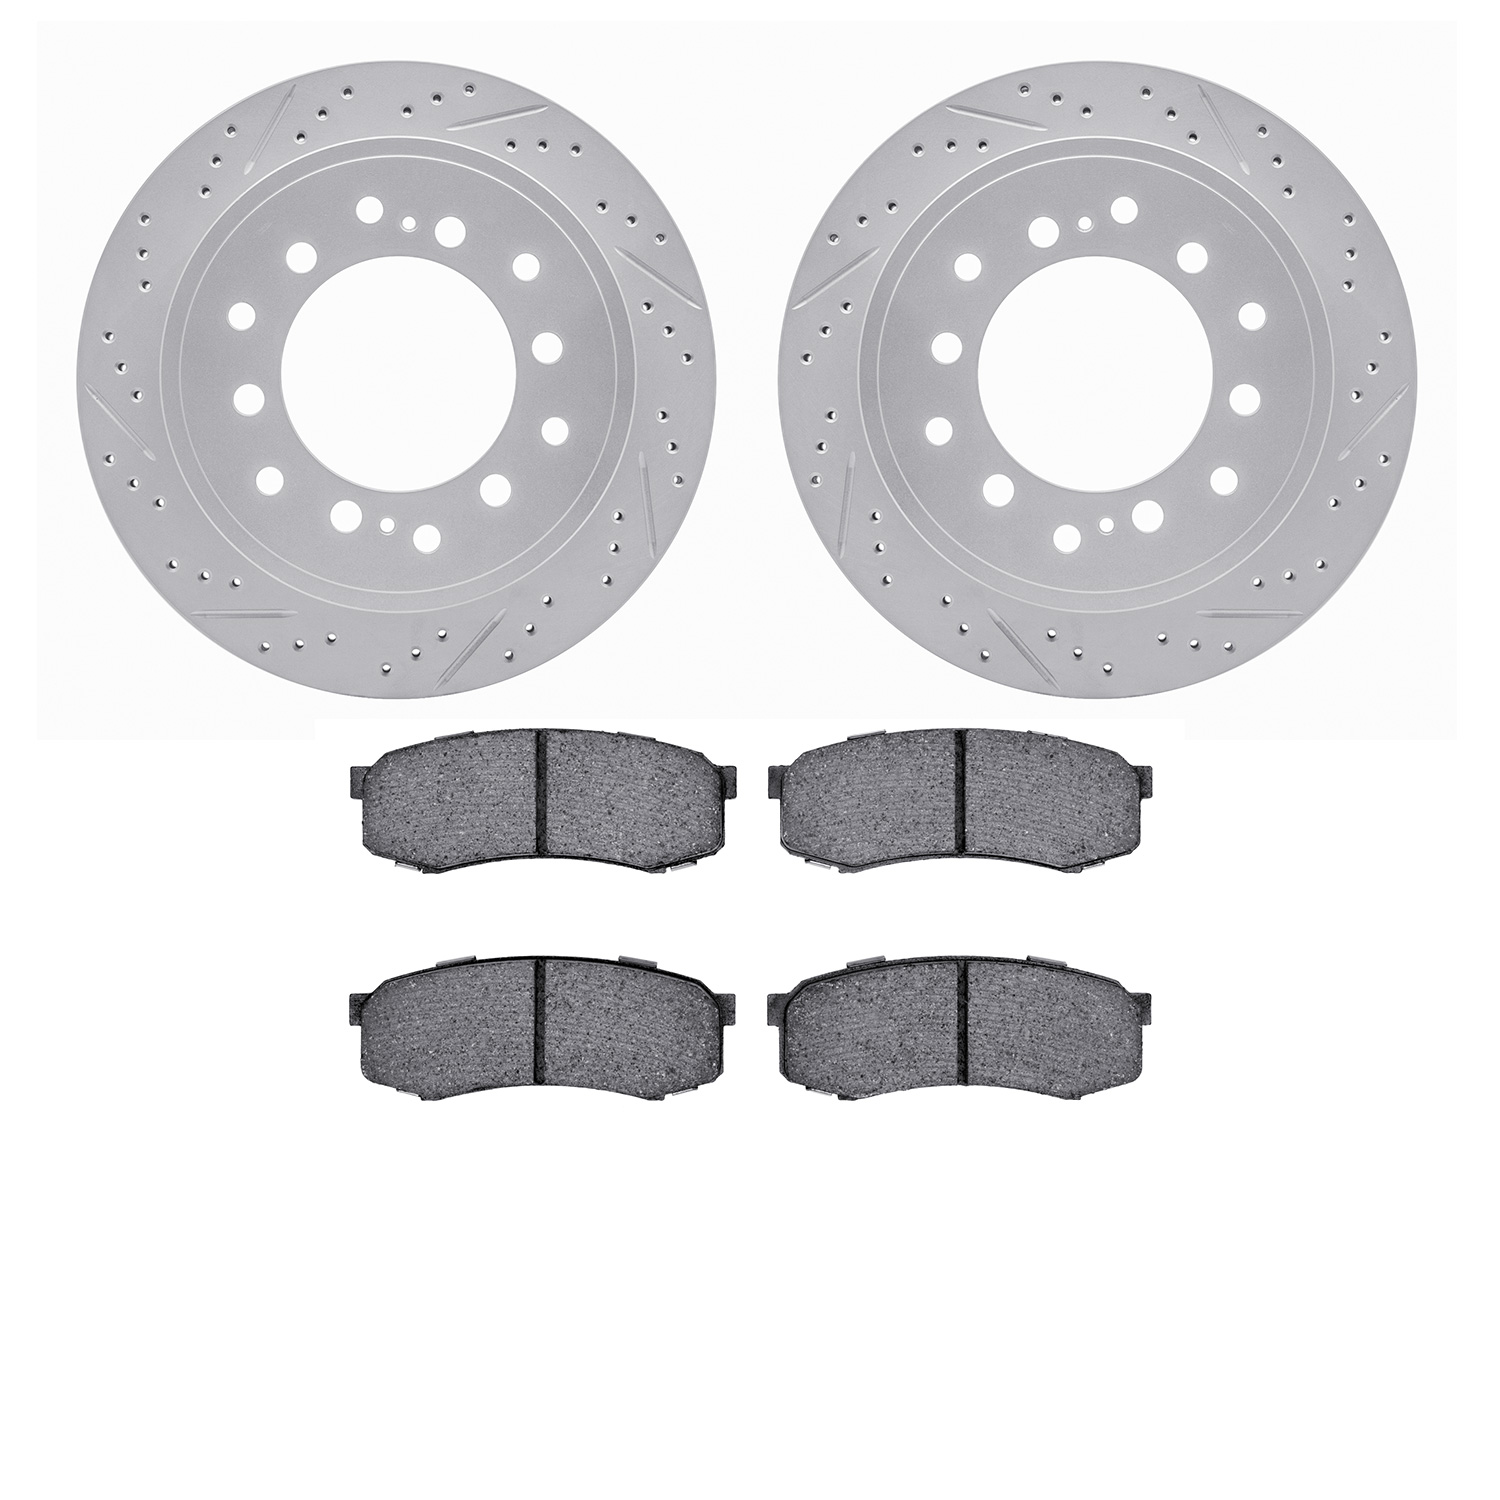 2402-76017 Geoperformance Drilled/Slotted Brake Rotors with Ultimate-Duty Brake Pads Kit, Fits Select Lexus/Toyota/Scion, Positi